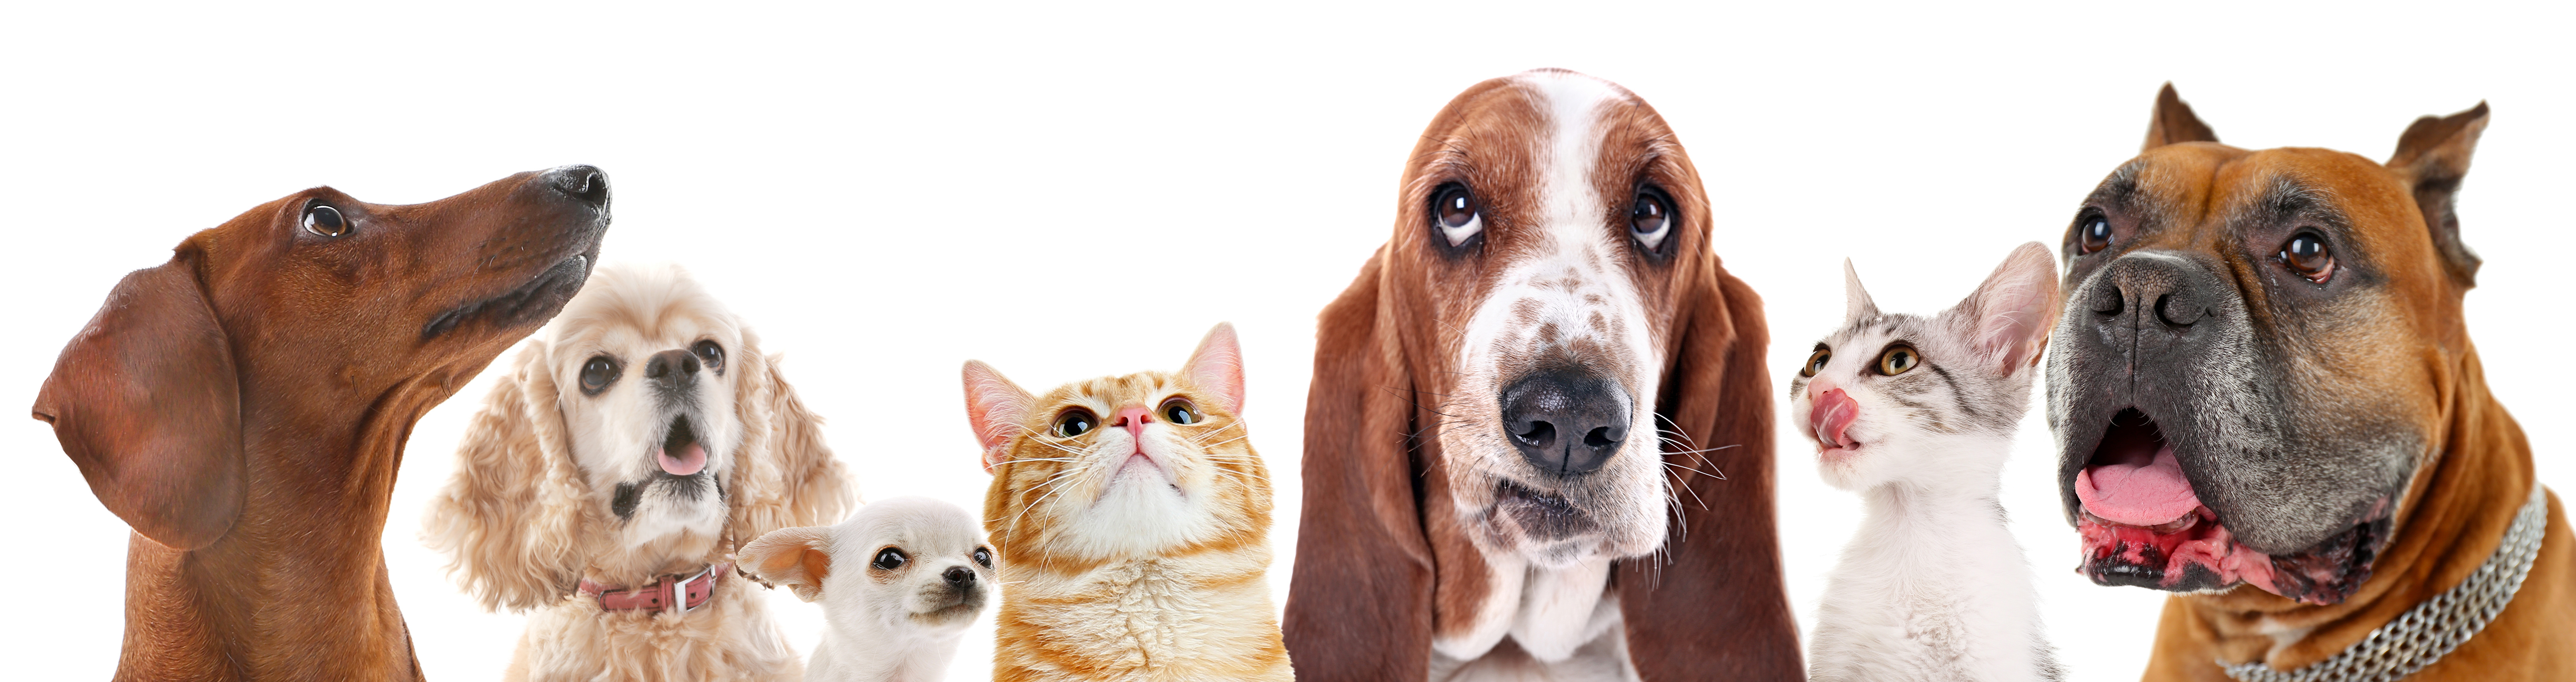 Cute friendly pets on white background Kremer Veterinary Services